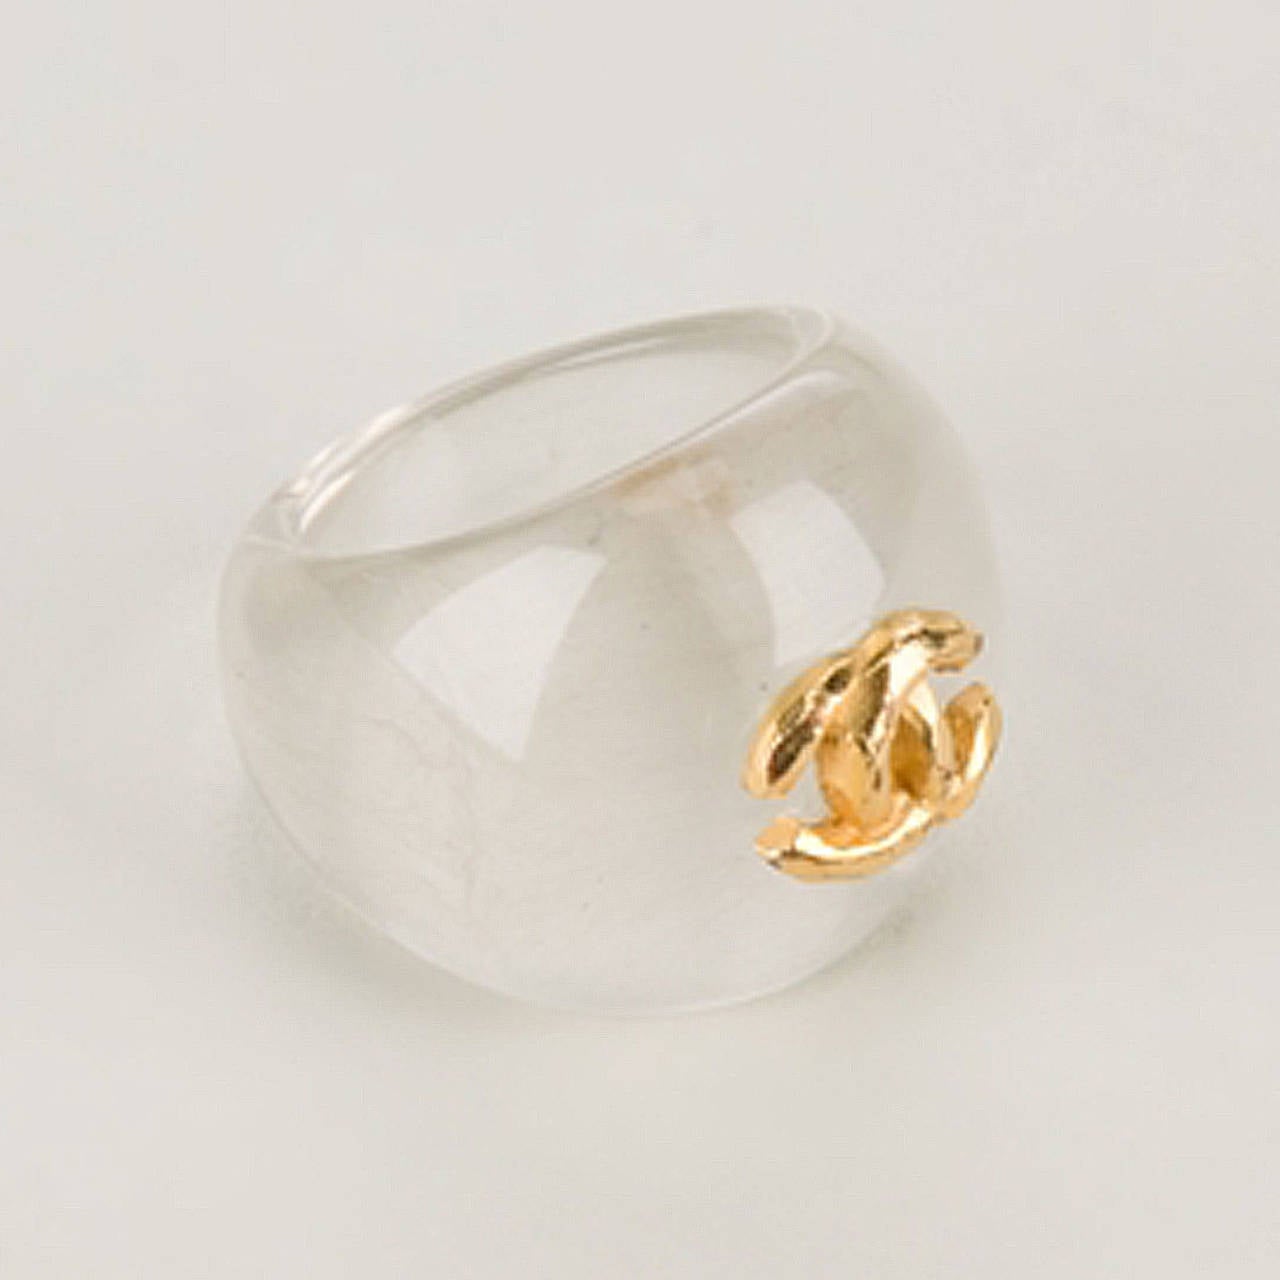 Chanel Acrylic Ring.Chanel Acrylic Ring.Clear acrylic ring from Chanel Vintage featuring a gold-tone logo motif at the front.

Colour: Clear, gold

Material: Acrylic

Measurements: circumference: 5.2cm

Condition: ★★★ Pre-owned, very good